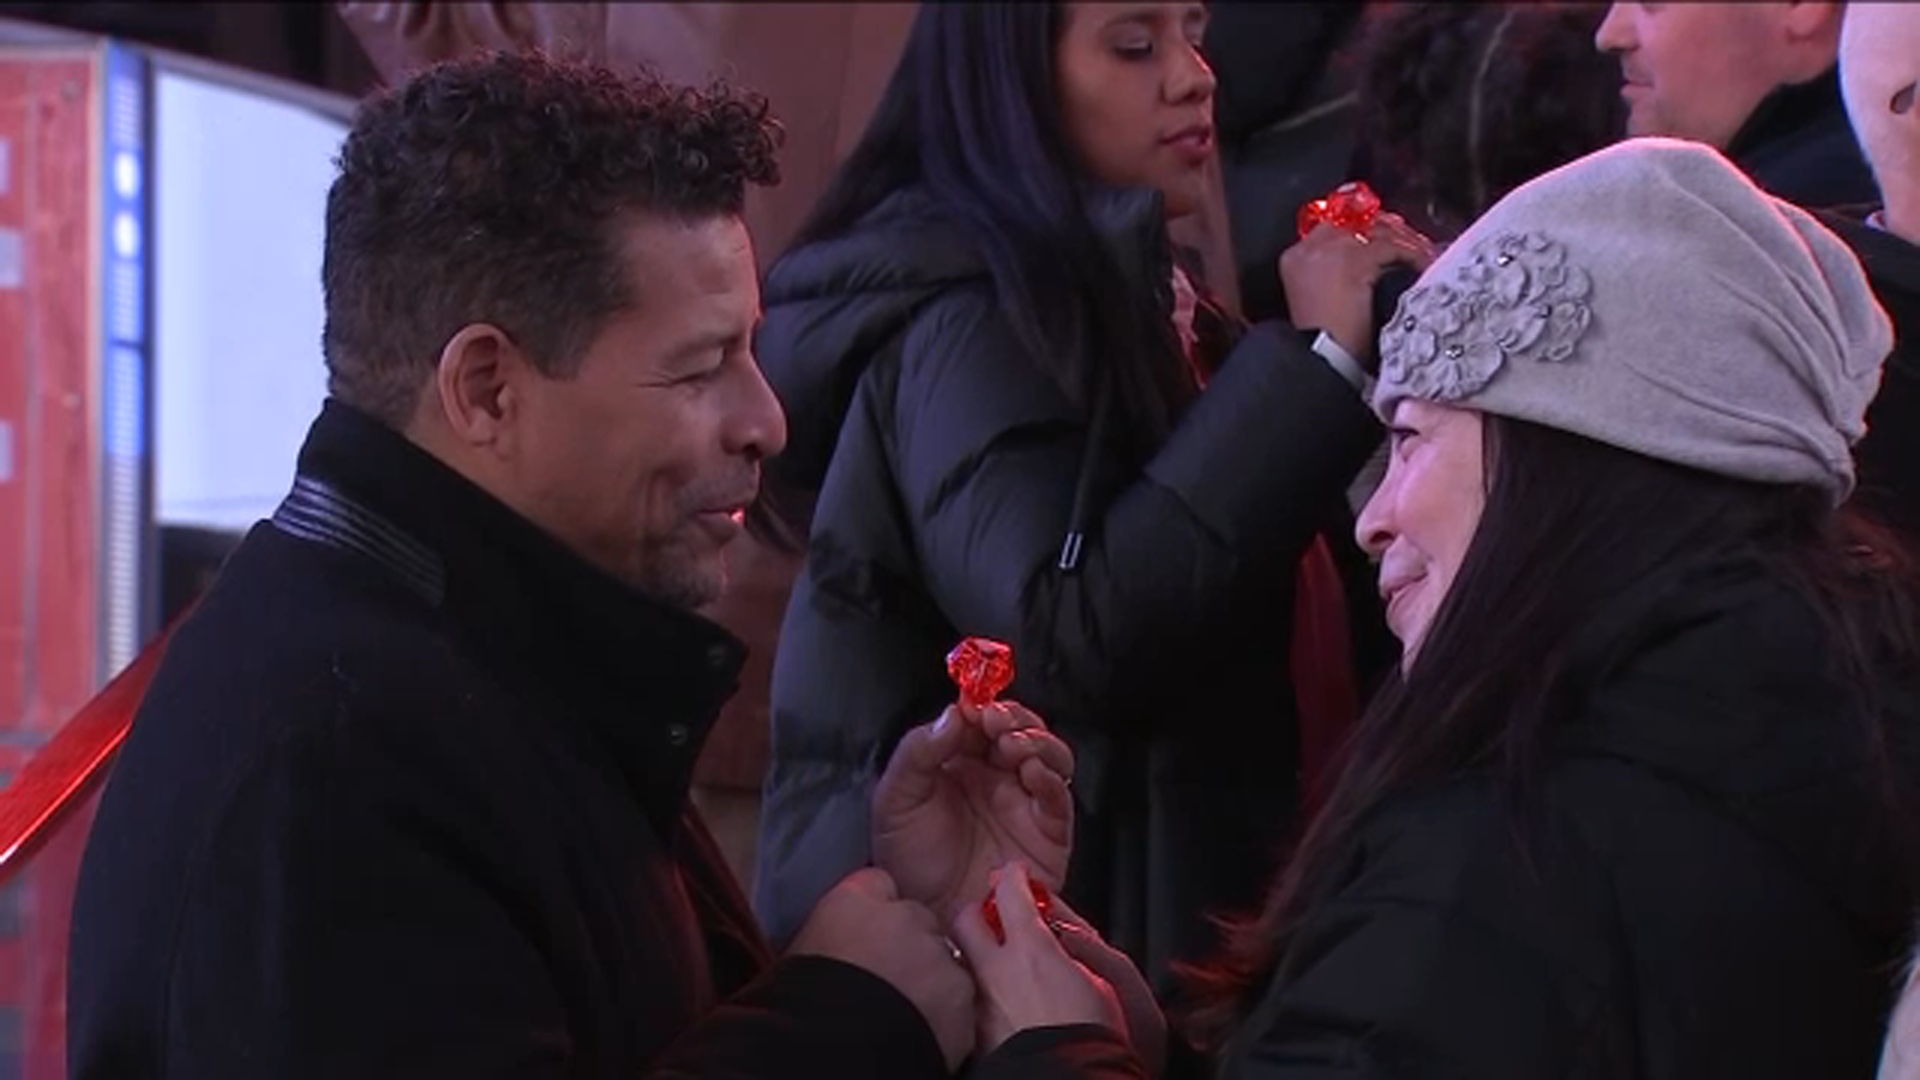 Hundreds celebrate their love by renewing vows in public in Times Square